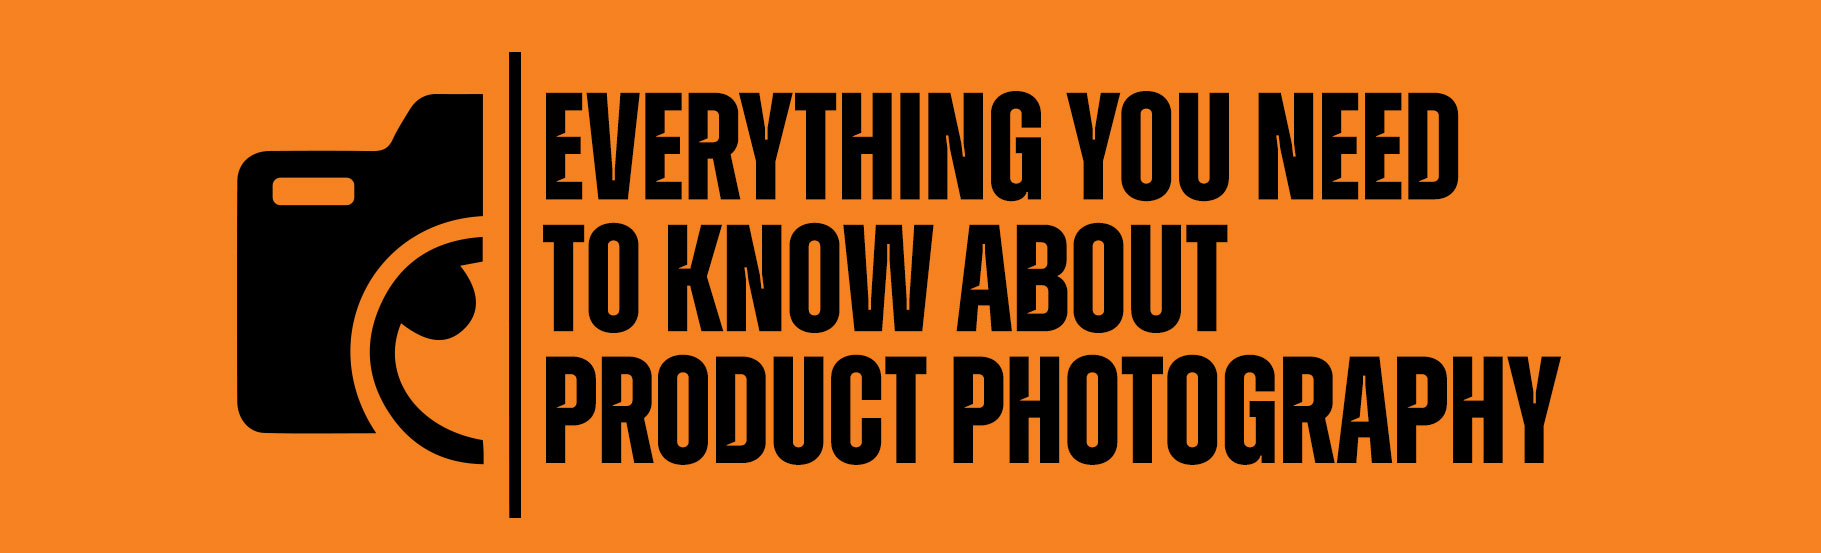 Guide: Everything you need to know about product photography